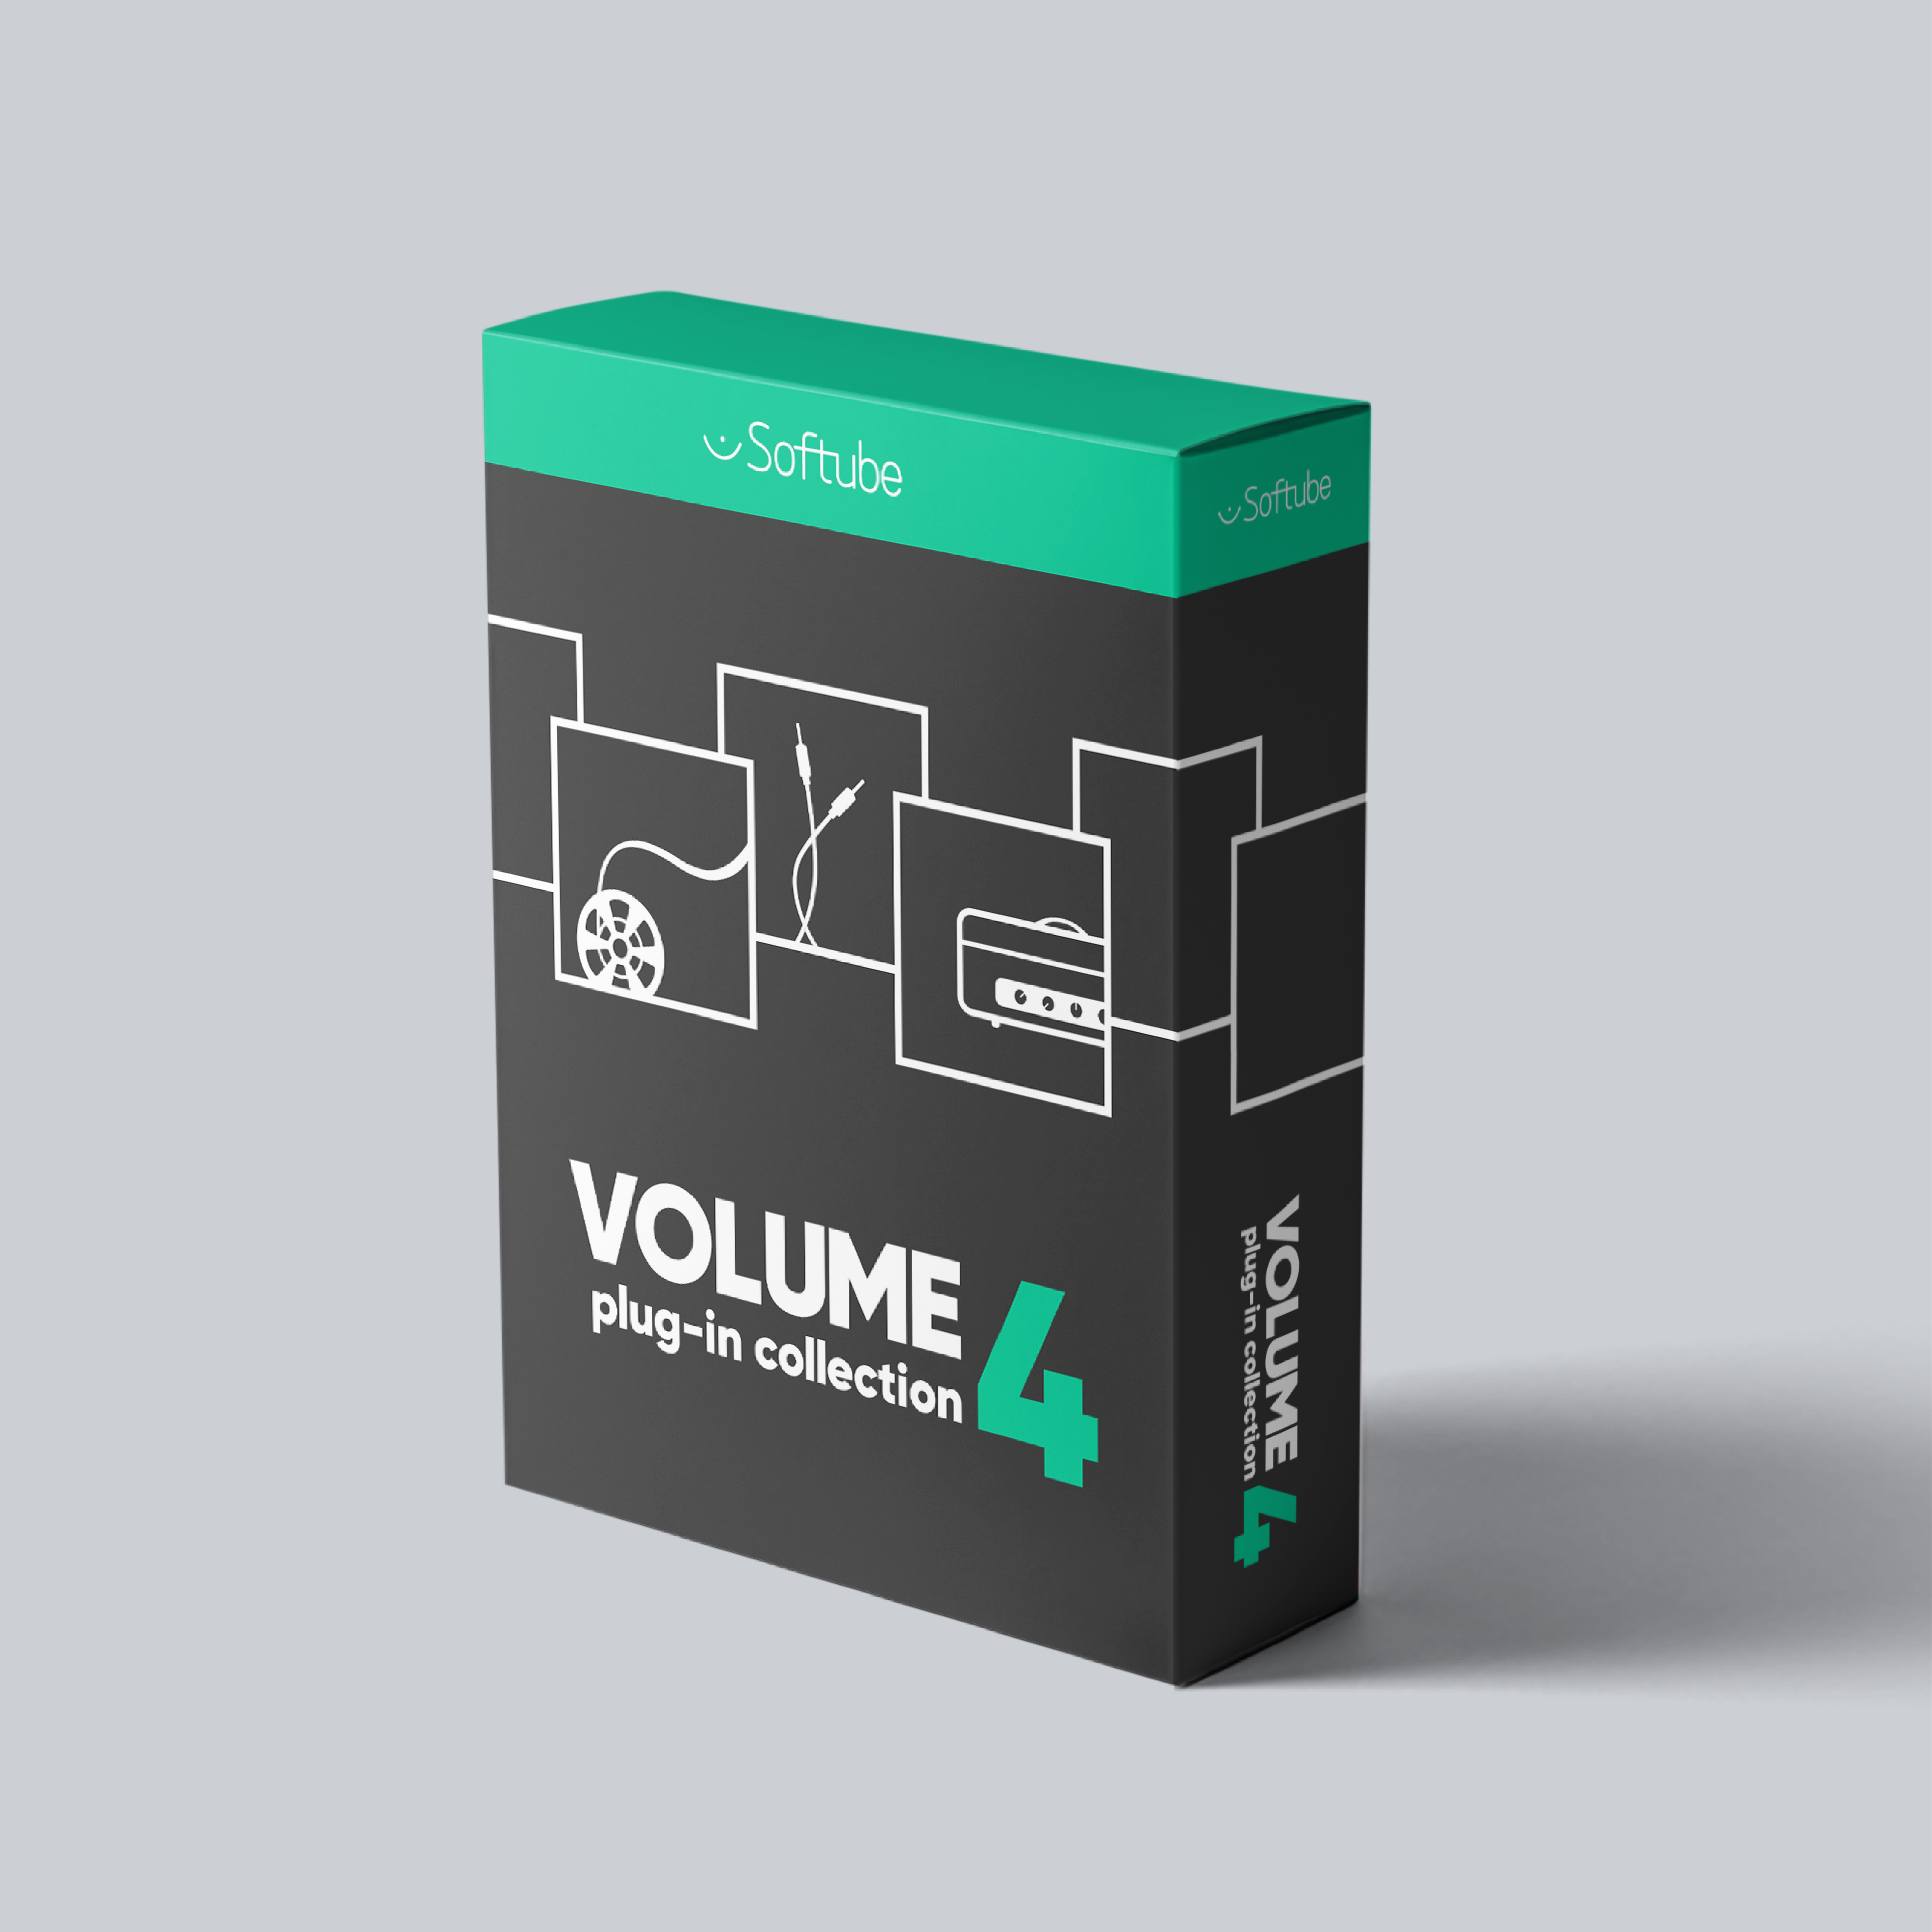 Softube Releases Volume 4 Collection